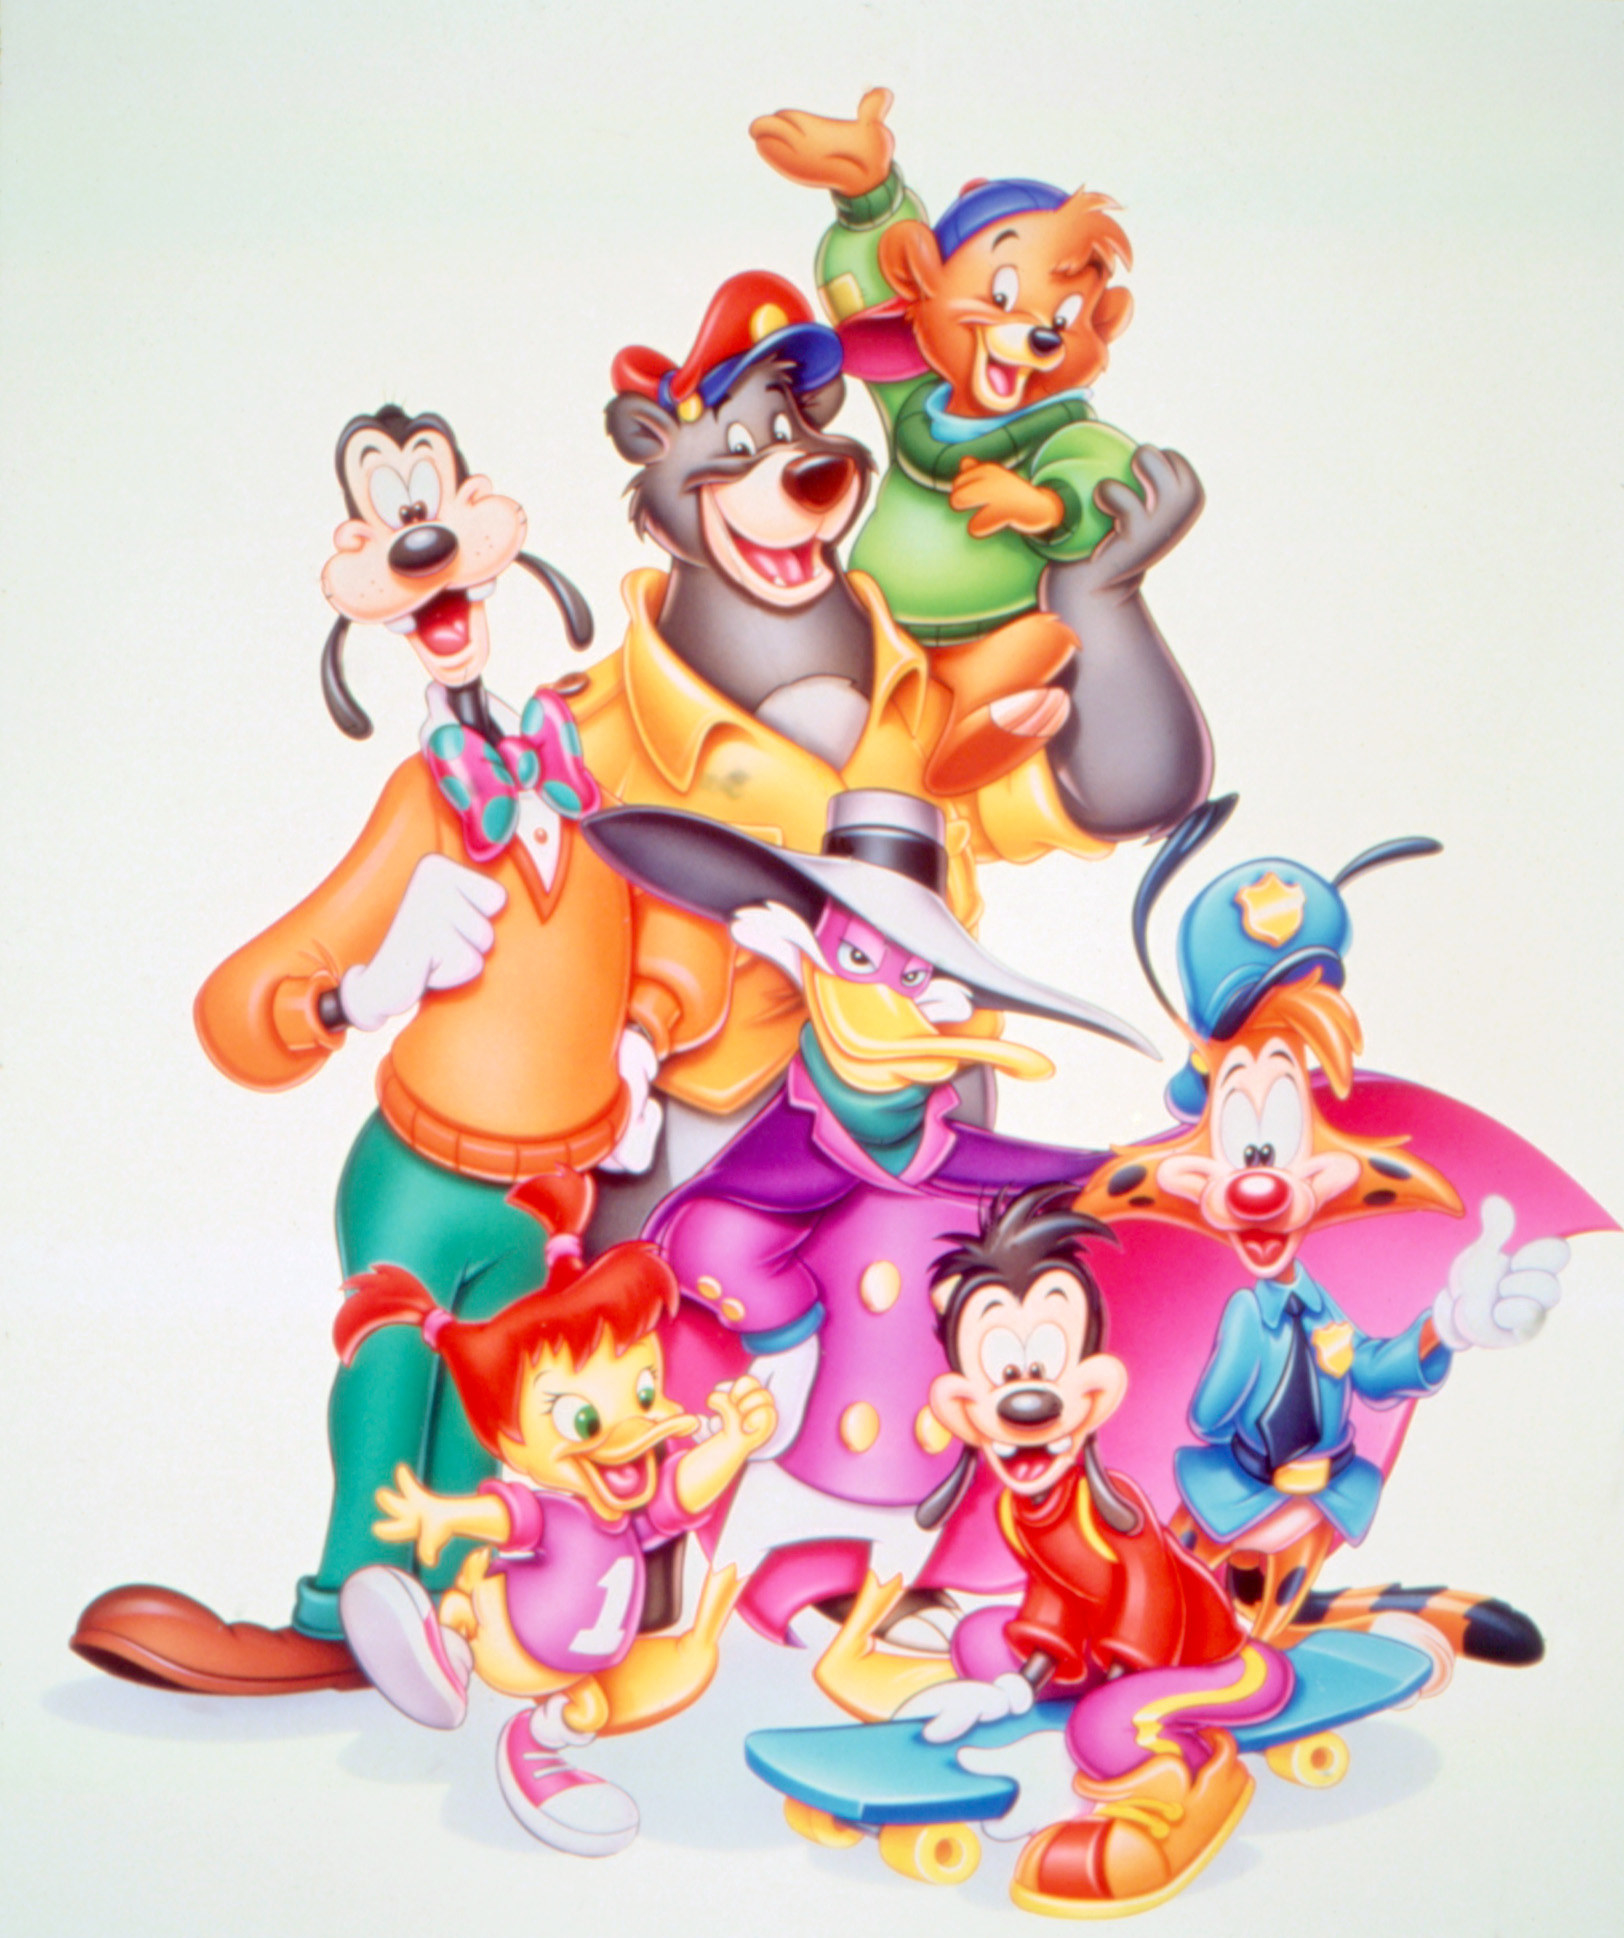 A Disney Afternoon promotional drawing of the characters from &quot;Goof Troop,&quot; &quot;Tale Spin,&quot; &quot;Bonkers,&quot; and &quot;Darkwing Duck.&quot;